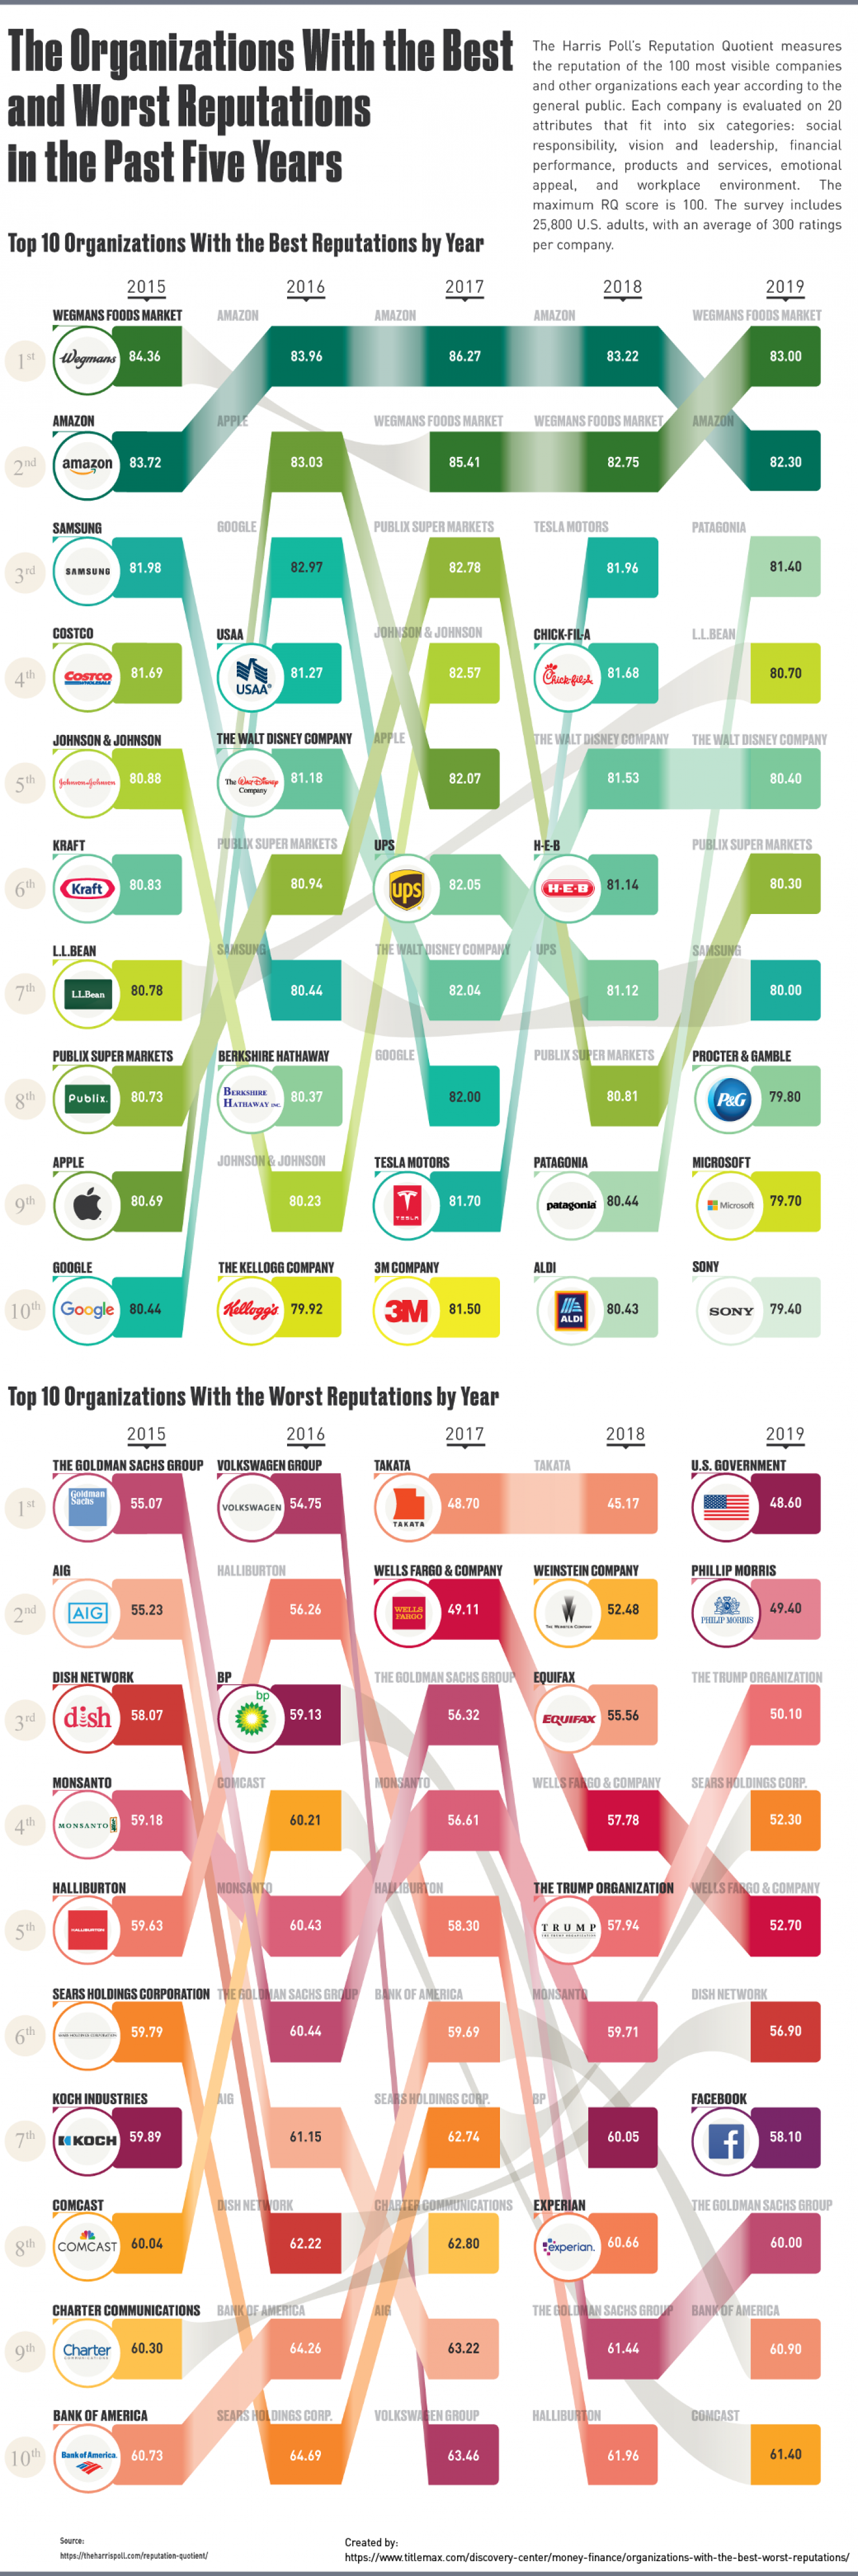  The Organizations With the Best and Worst Reputations in the Past Five Years  Infographic